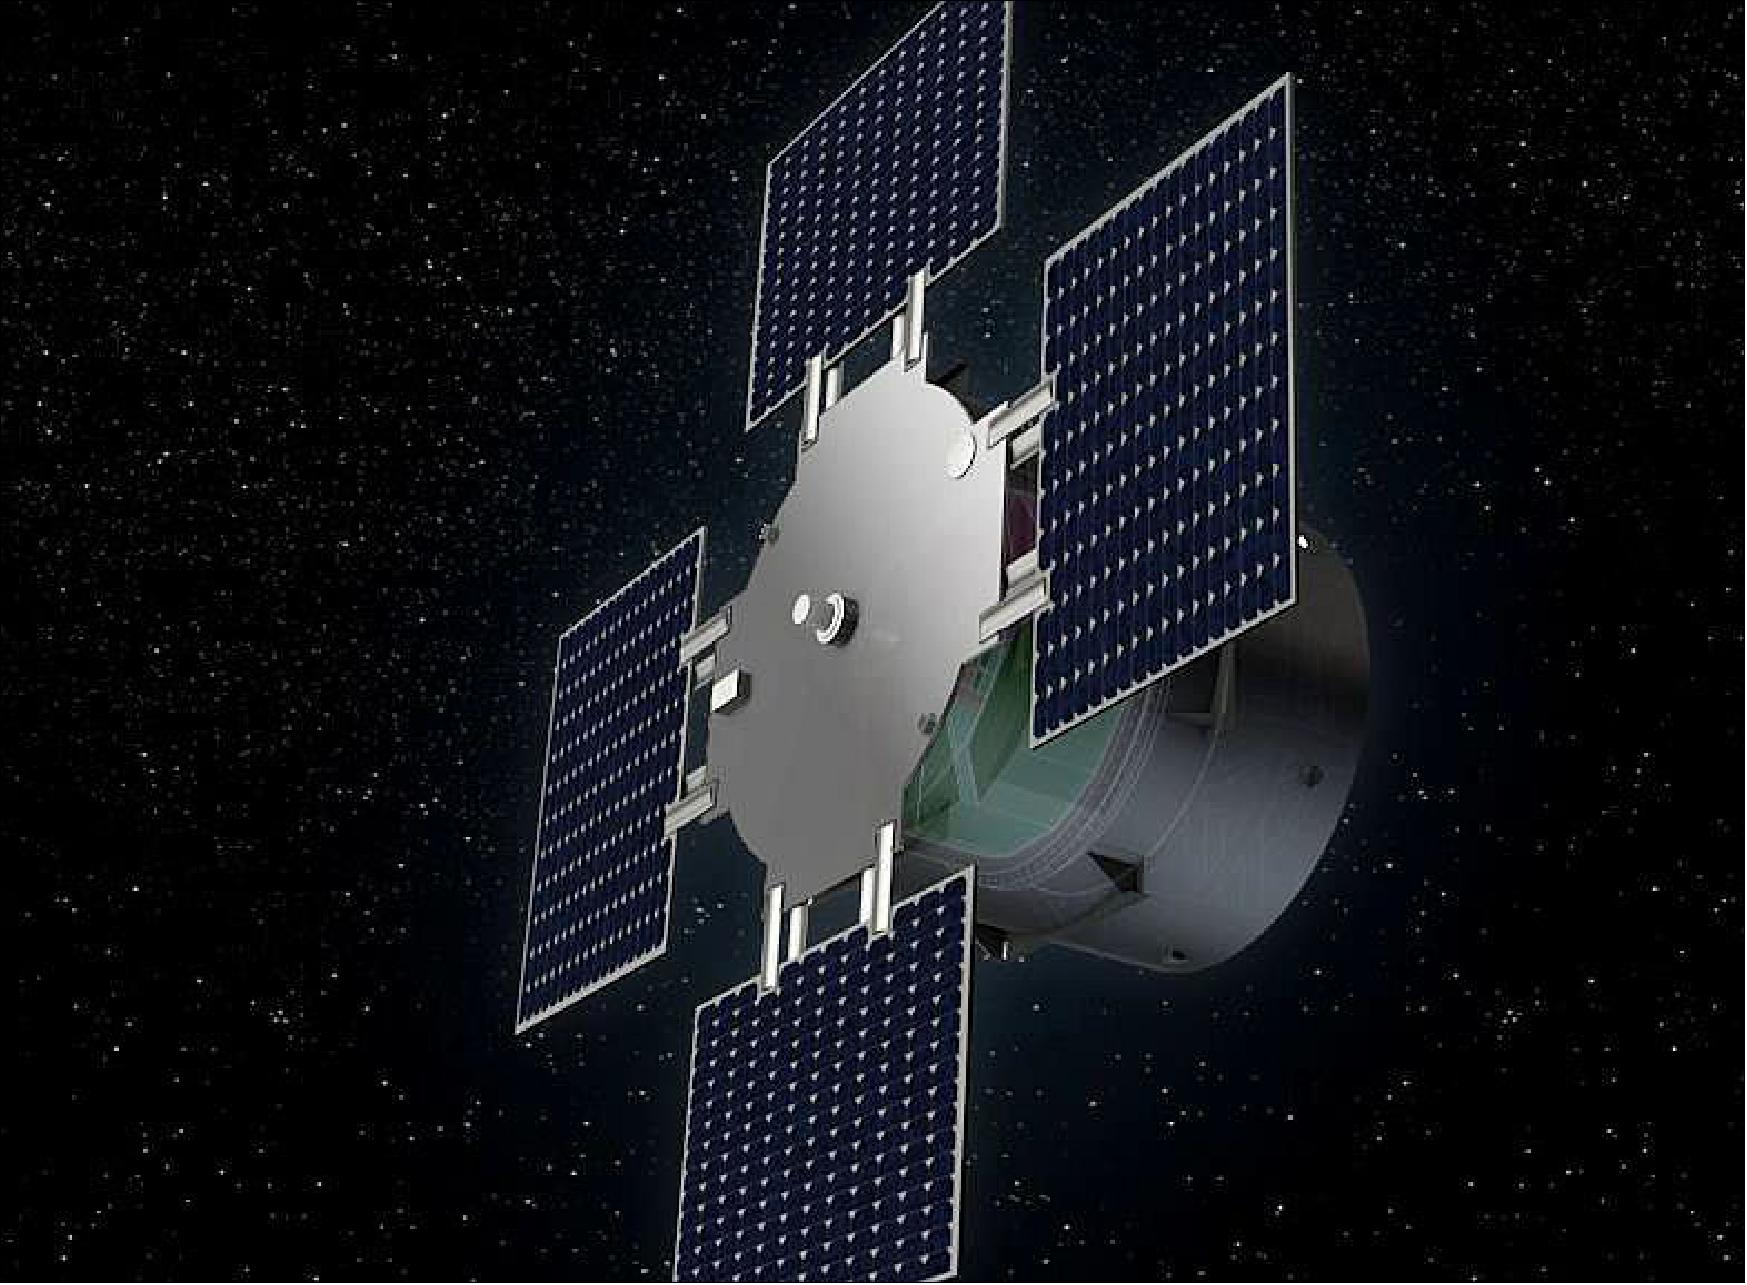 Figure 2: Artist's rendition of the deployed Eu:CROPIS minisatellite. The deployed configuration has a width of 2.88 m. An S-band antenna is seen in the center of the top plate (image credit: DLR)